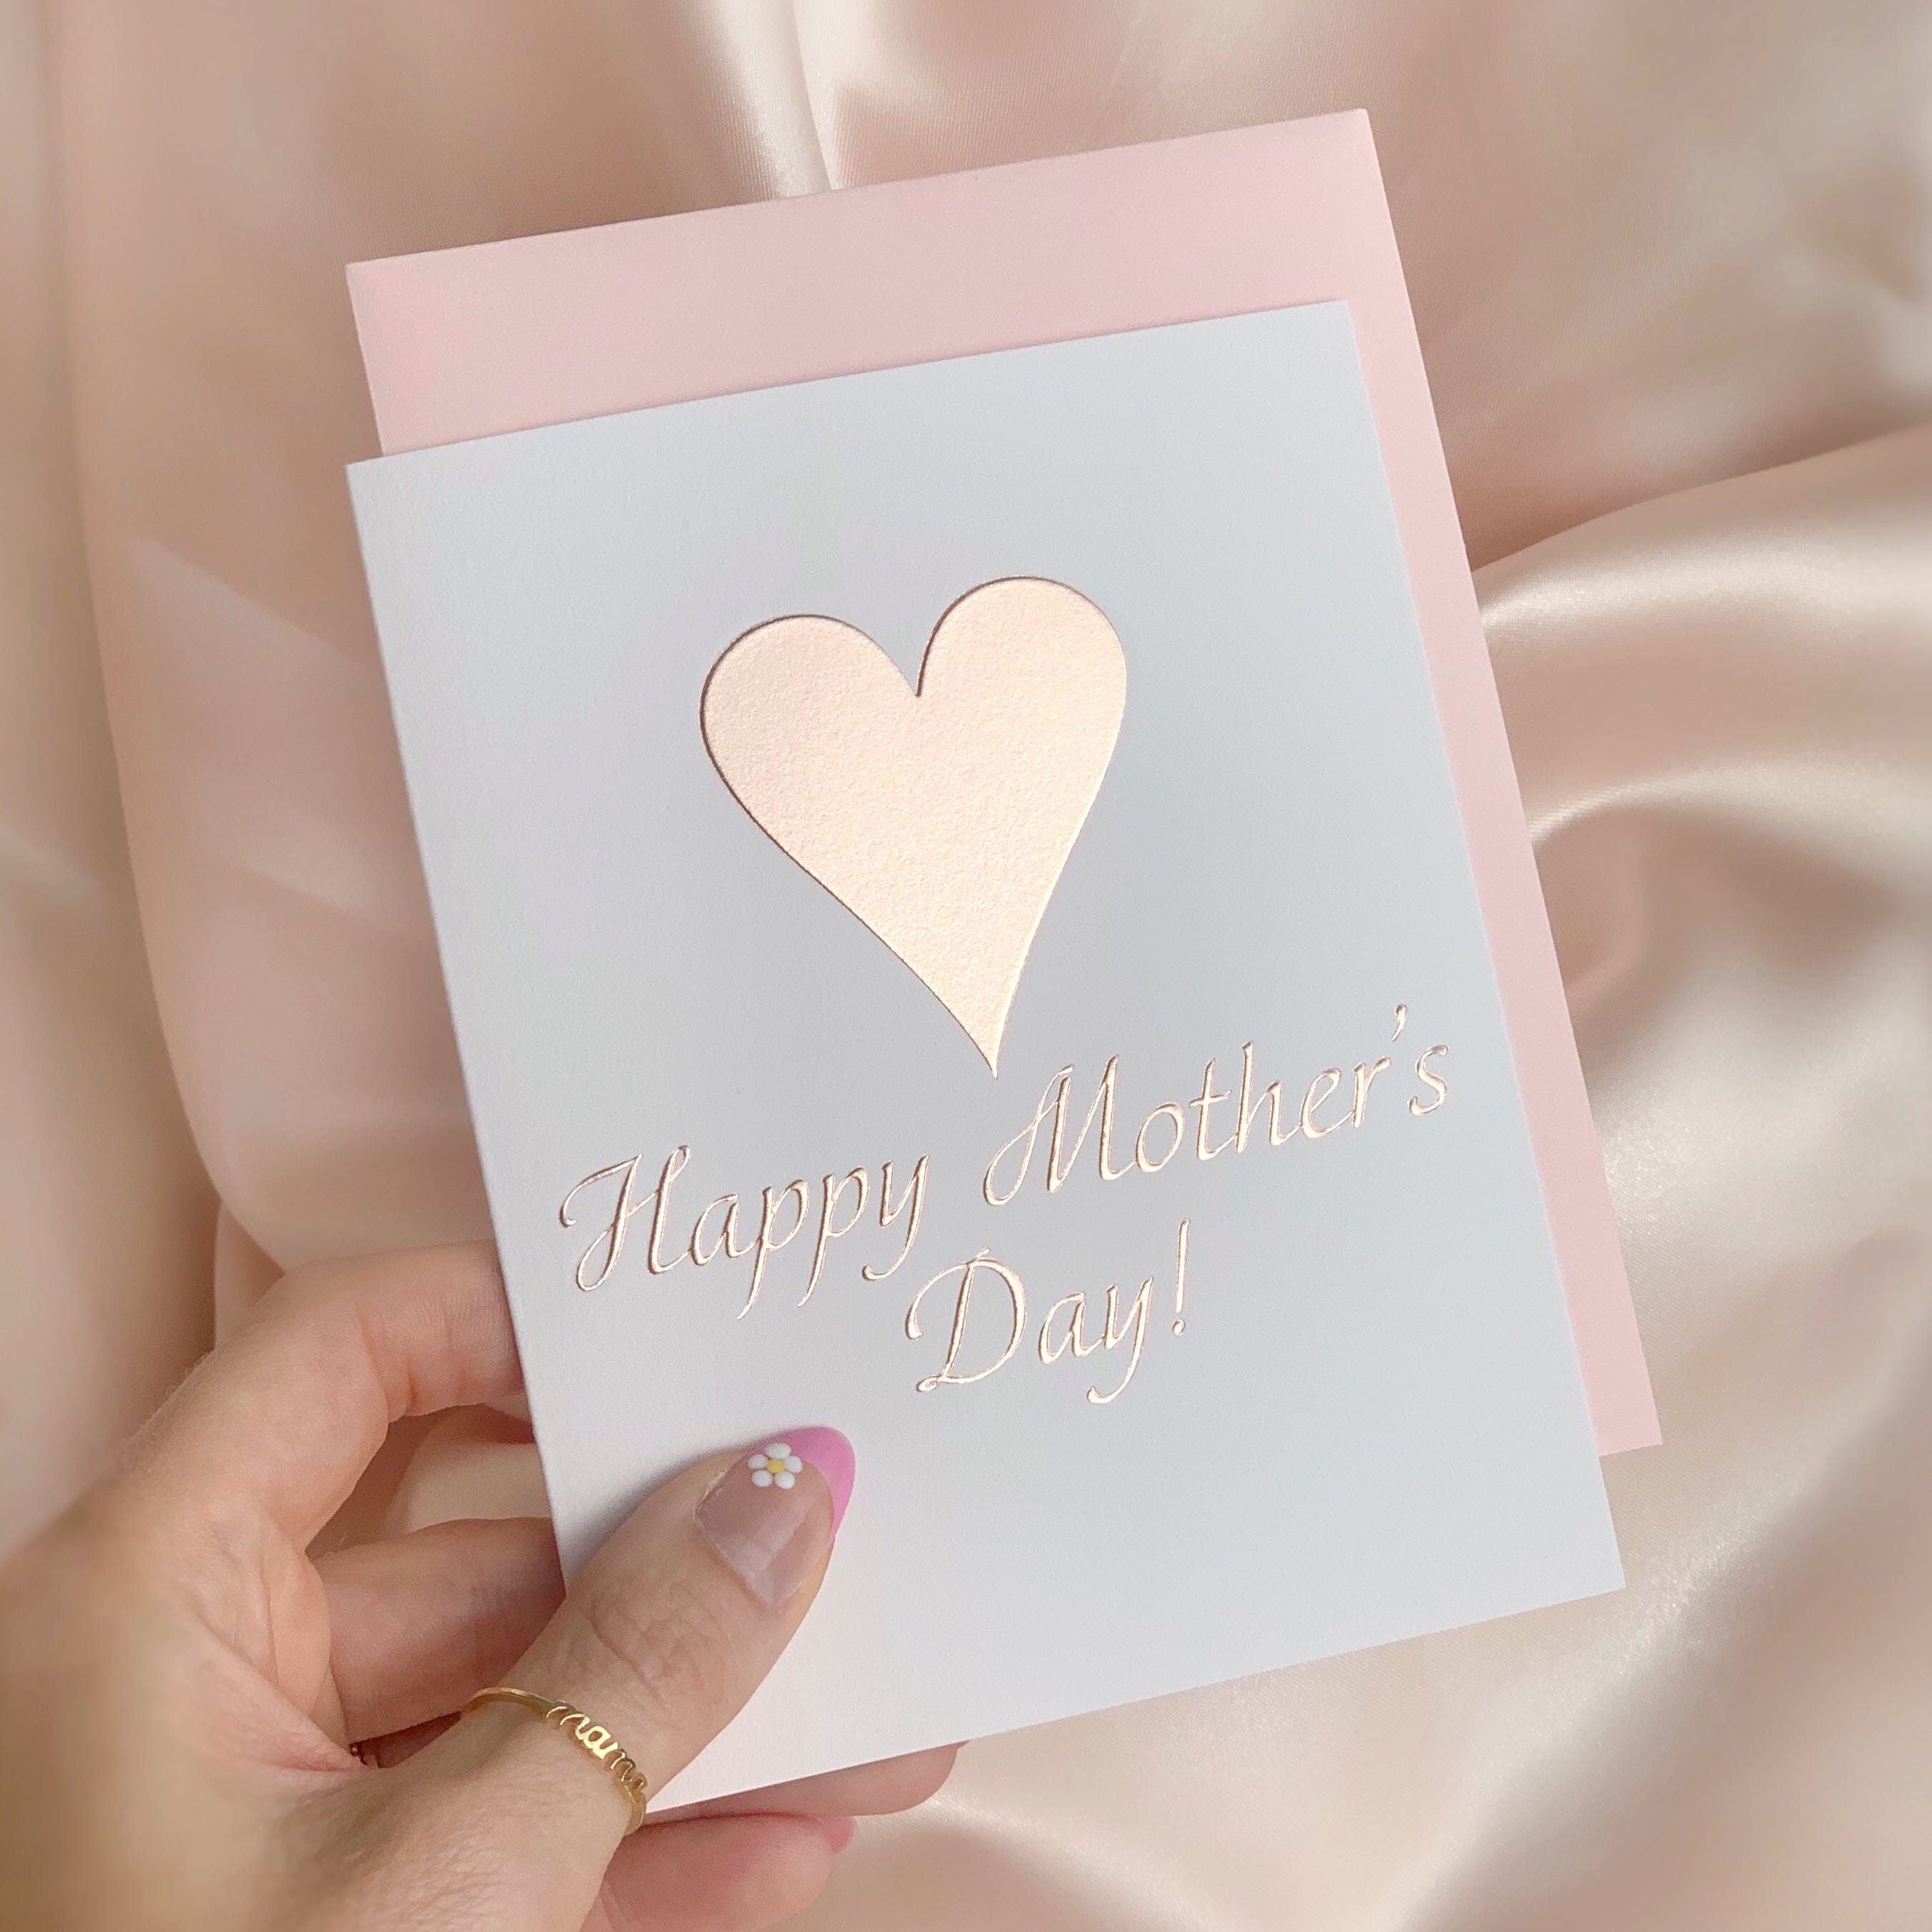 Mother's Day Foiled Card – STUDIO KATIA